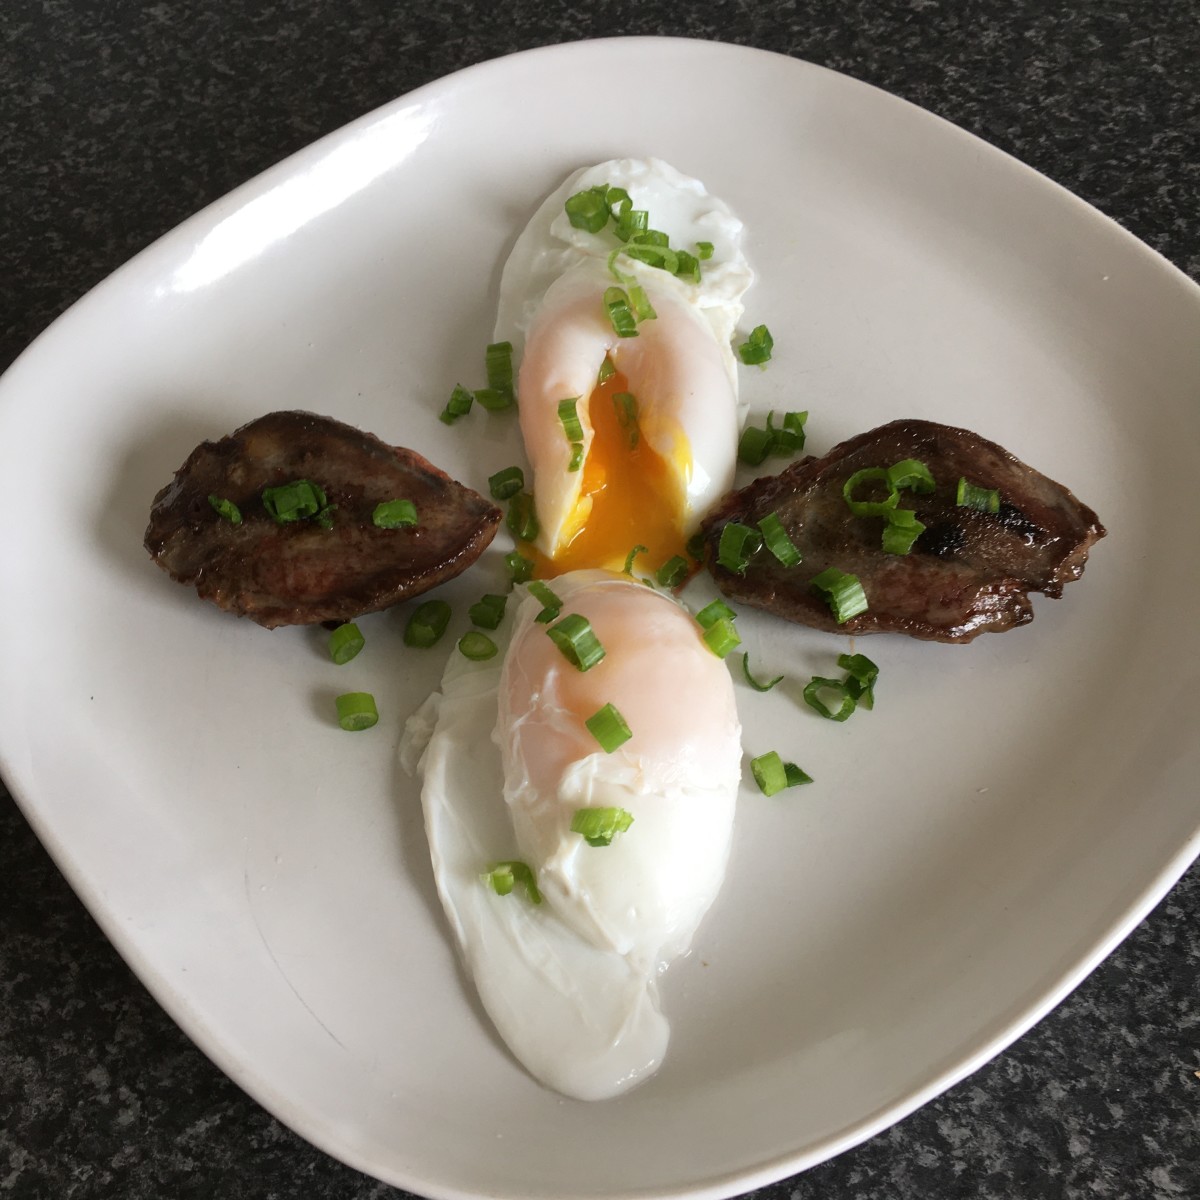 Pigeon breasts are simply served with poached fresh duck eggs